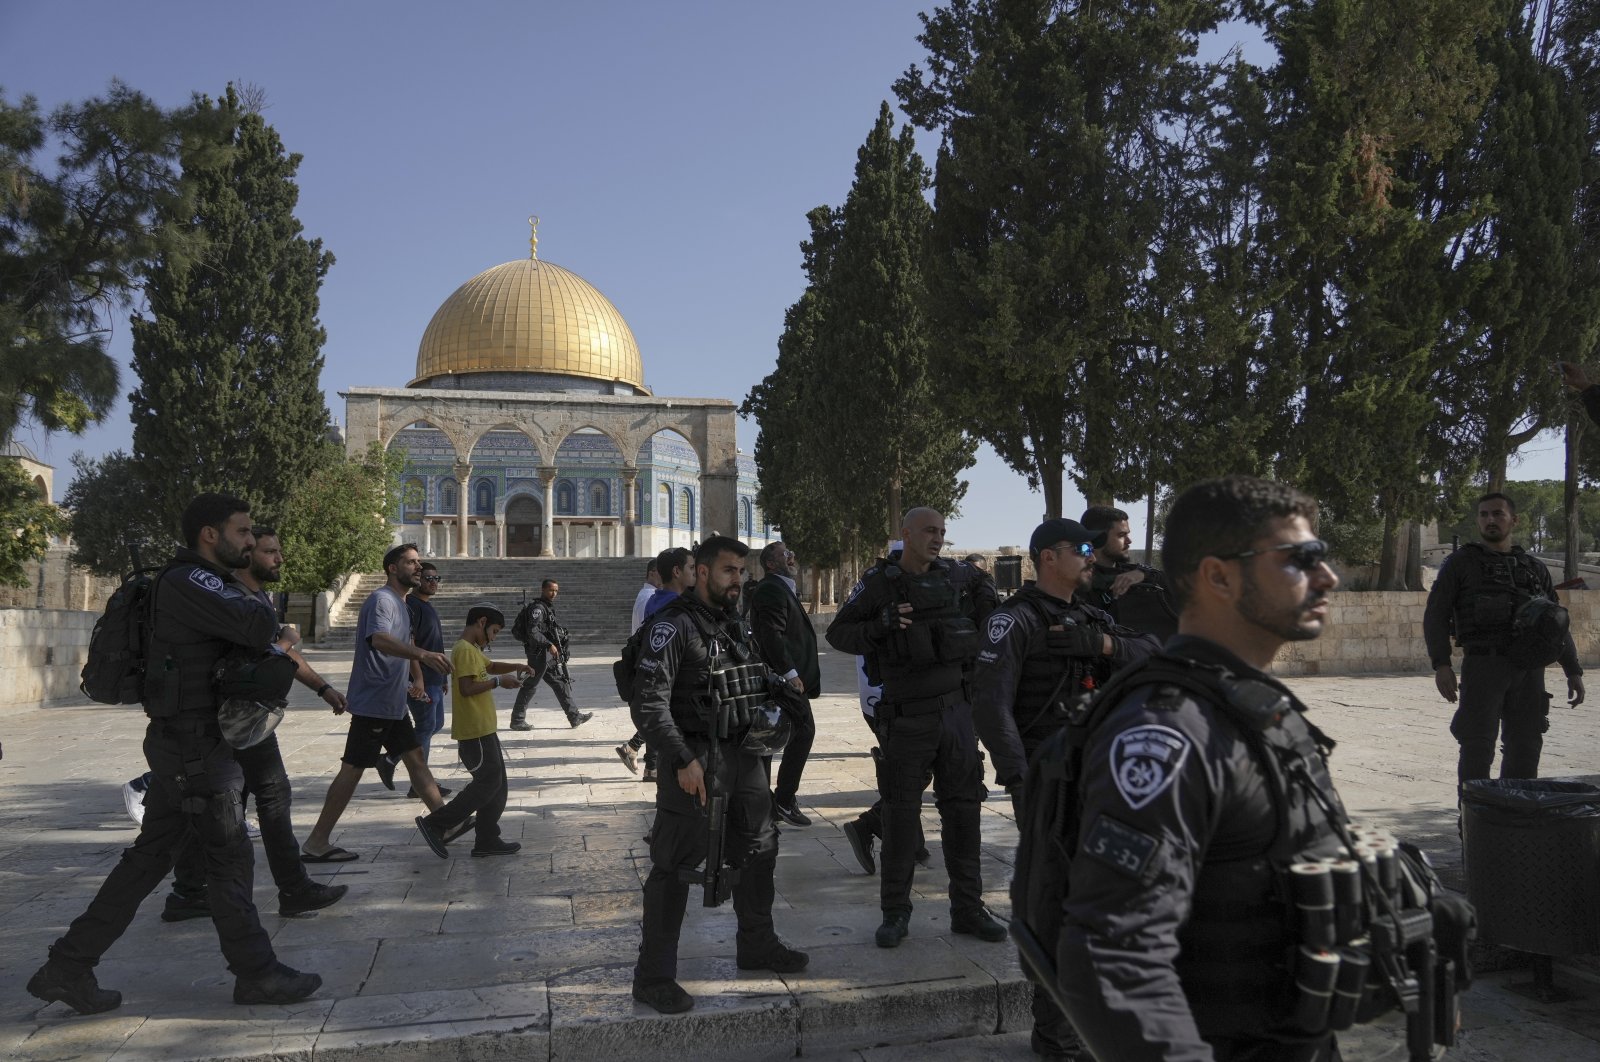 Israeli police officers escort a group of Jewish men visiting the Temple Mount, known to Muslims as the Noble Sanctuary, on the Al-Aqsa Mosque compound in the Old City of Jerusalem, Aug. 7, 2022. (AP Photo/Mahmoud Illean)